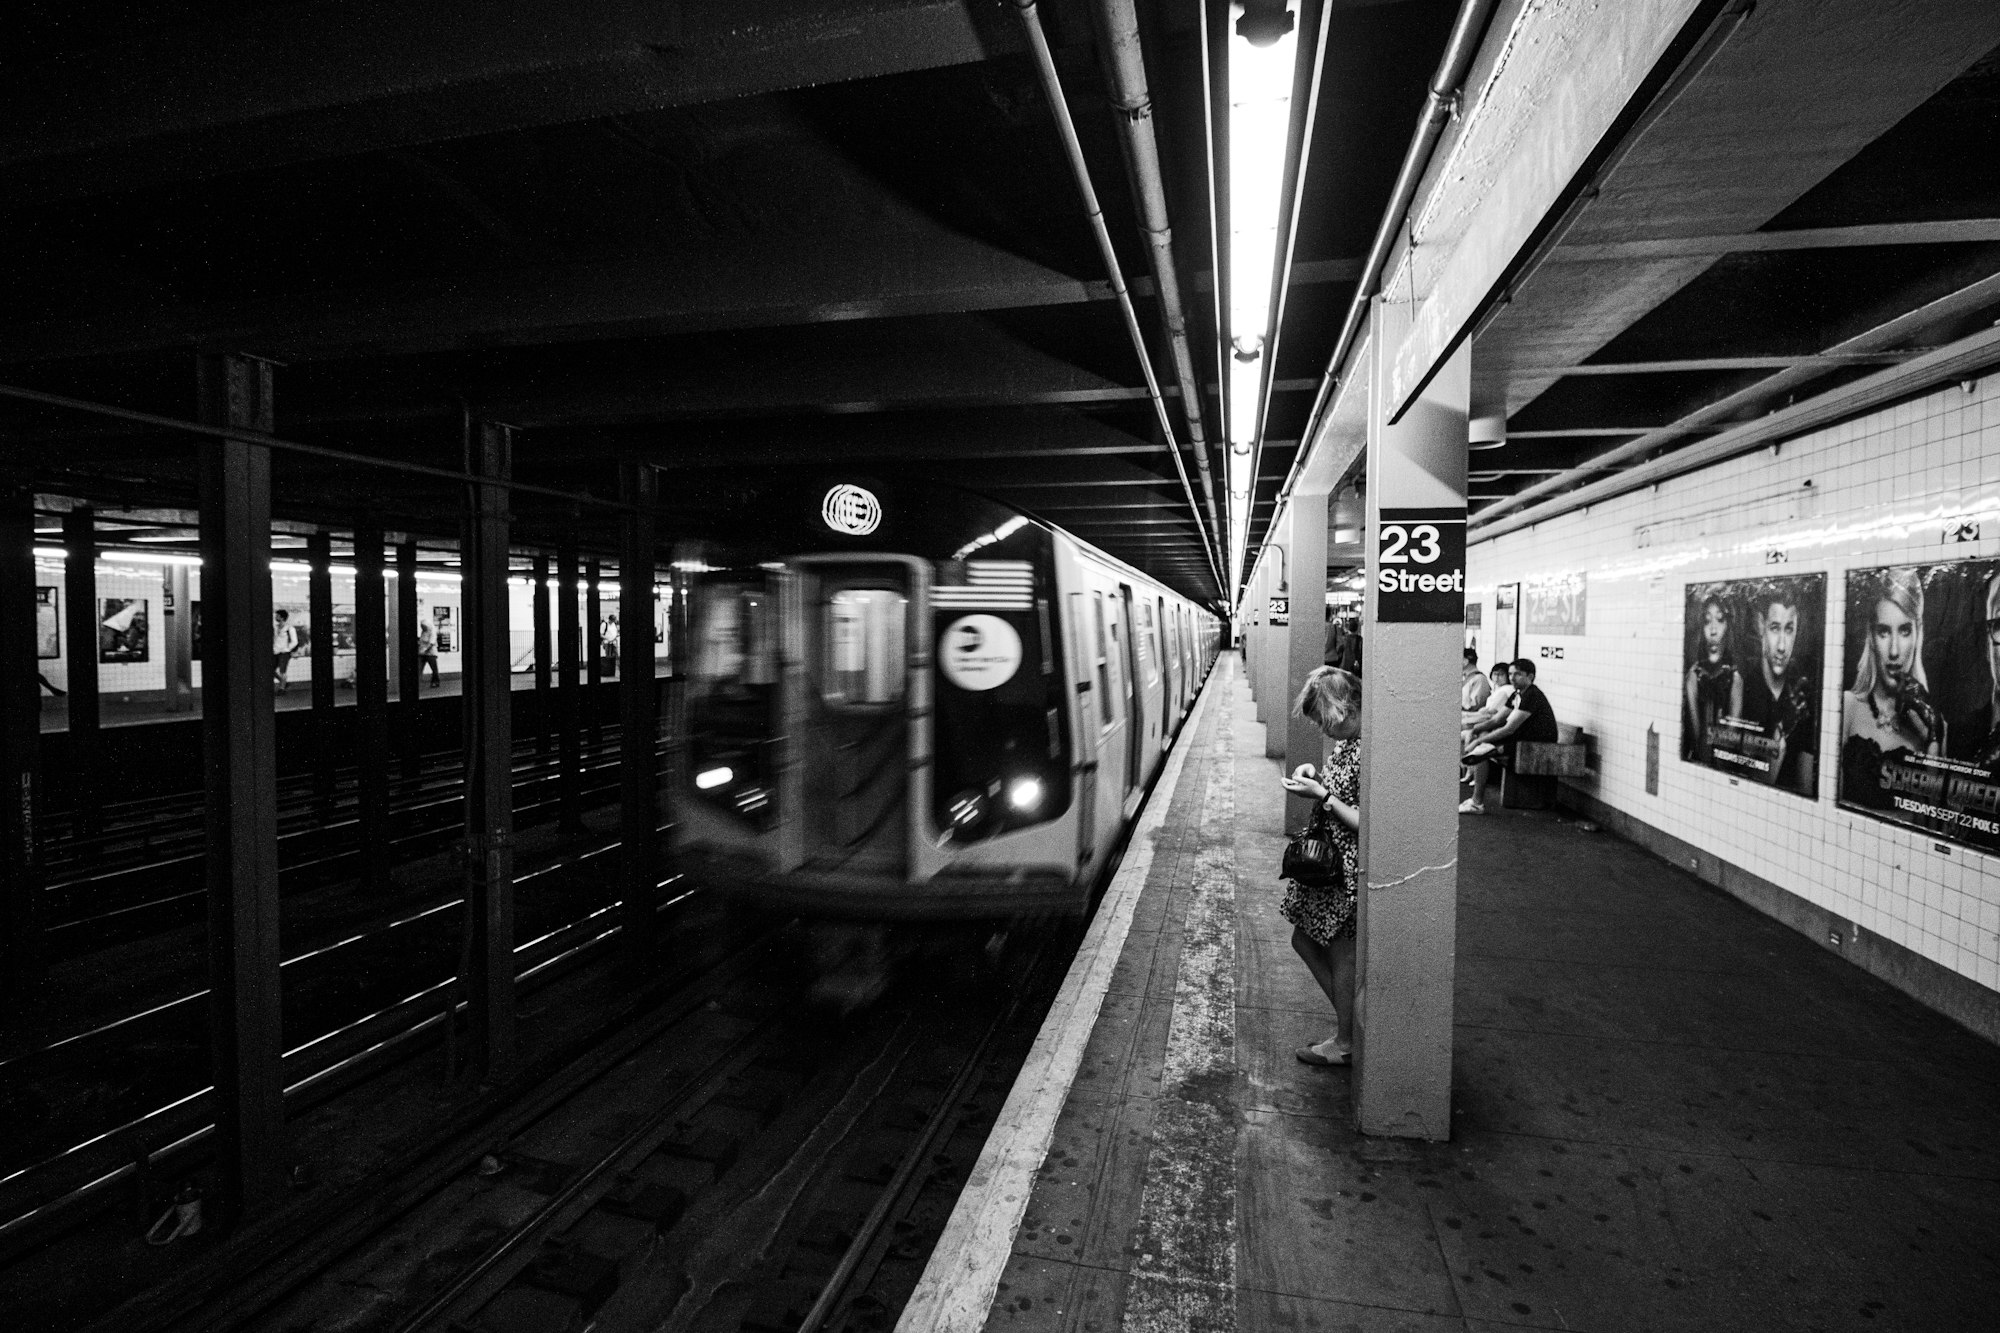 New York Metro Train E is arriving at 23 street